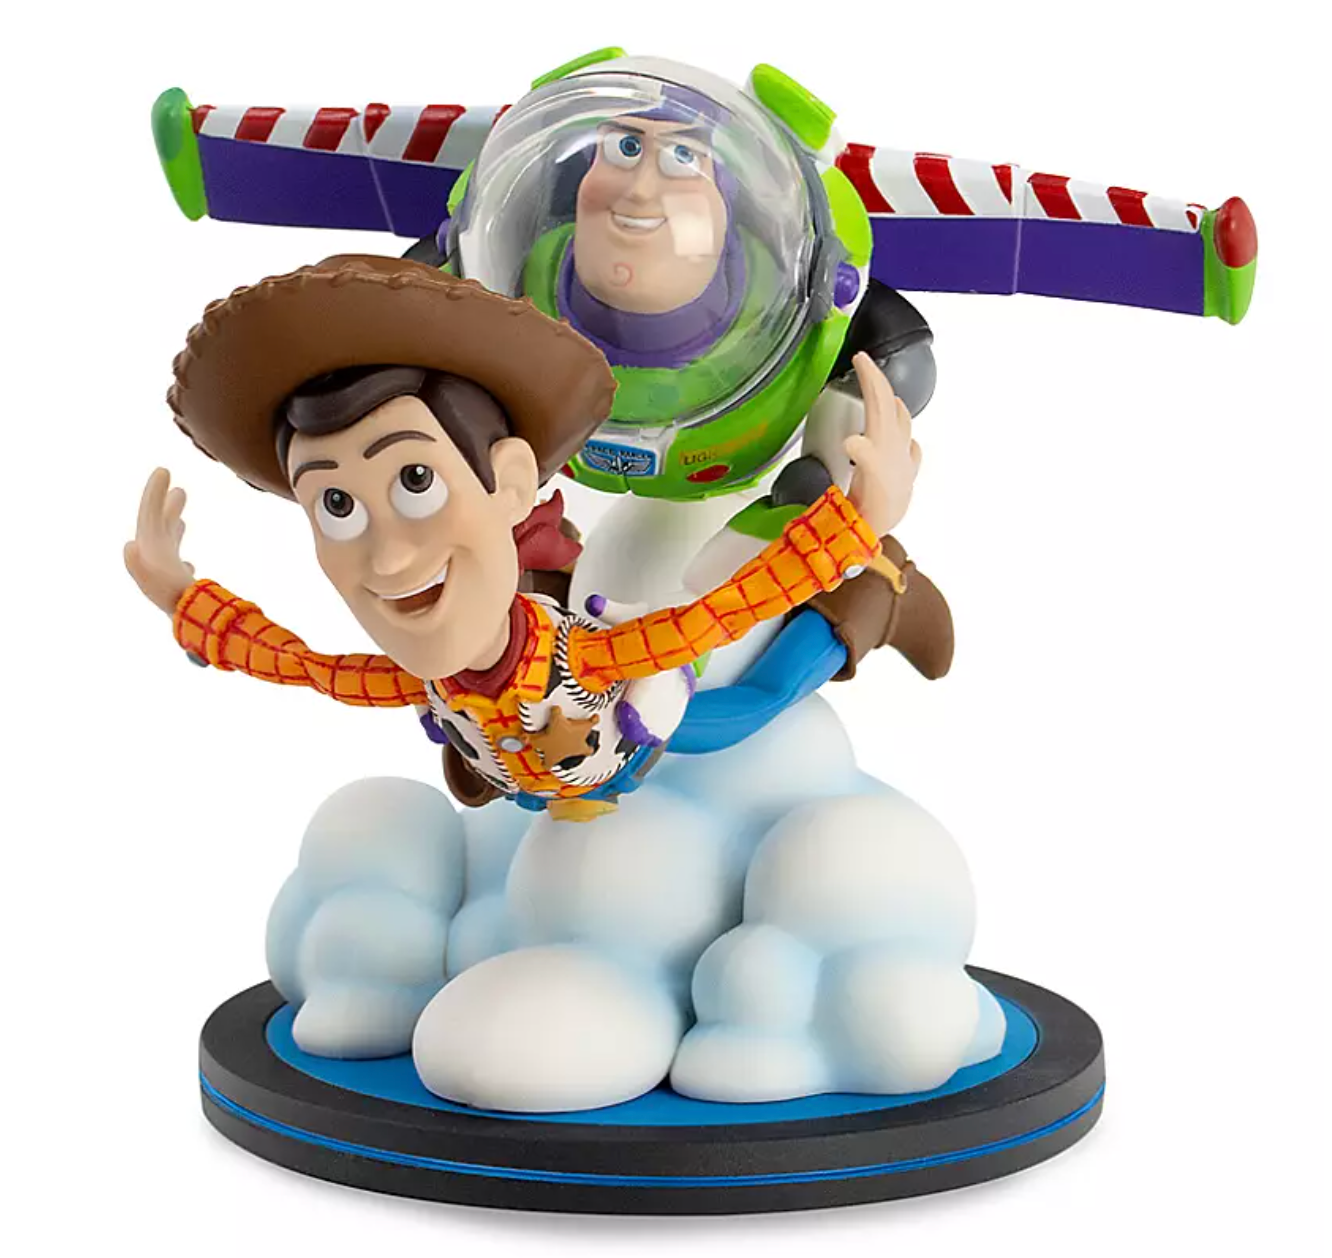 Disney Toy story 25th Woody and Buzz Q-Fig Max by QMx Figurine New with Box